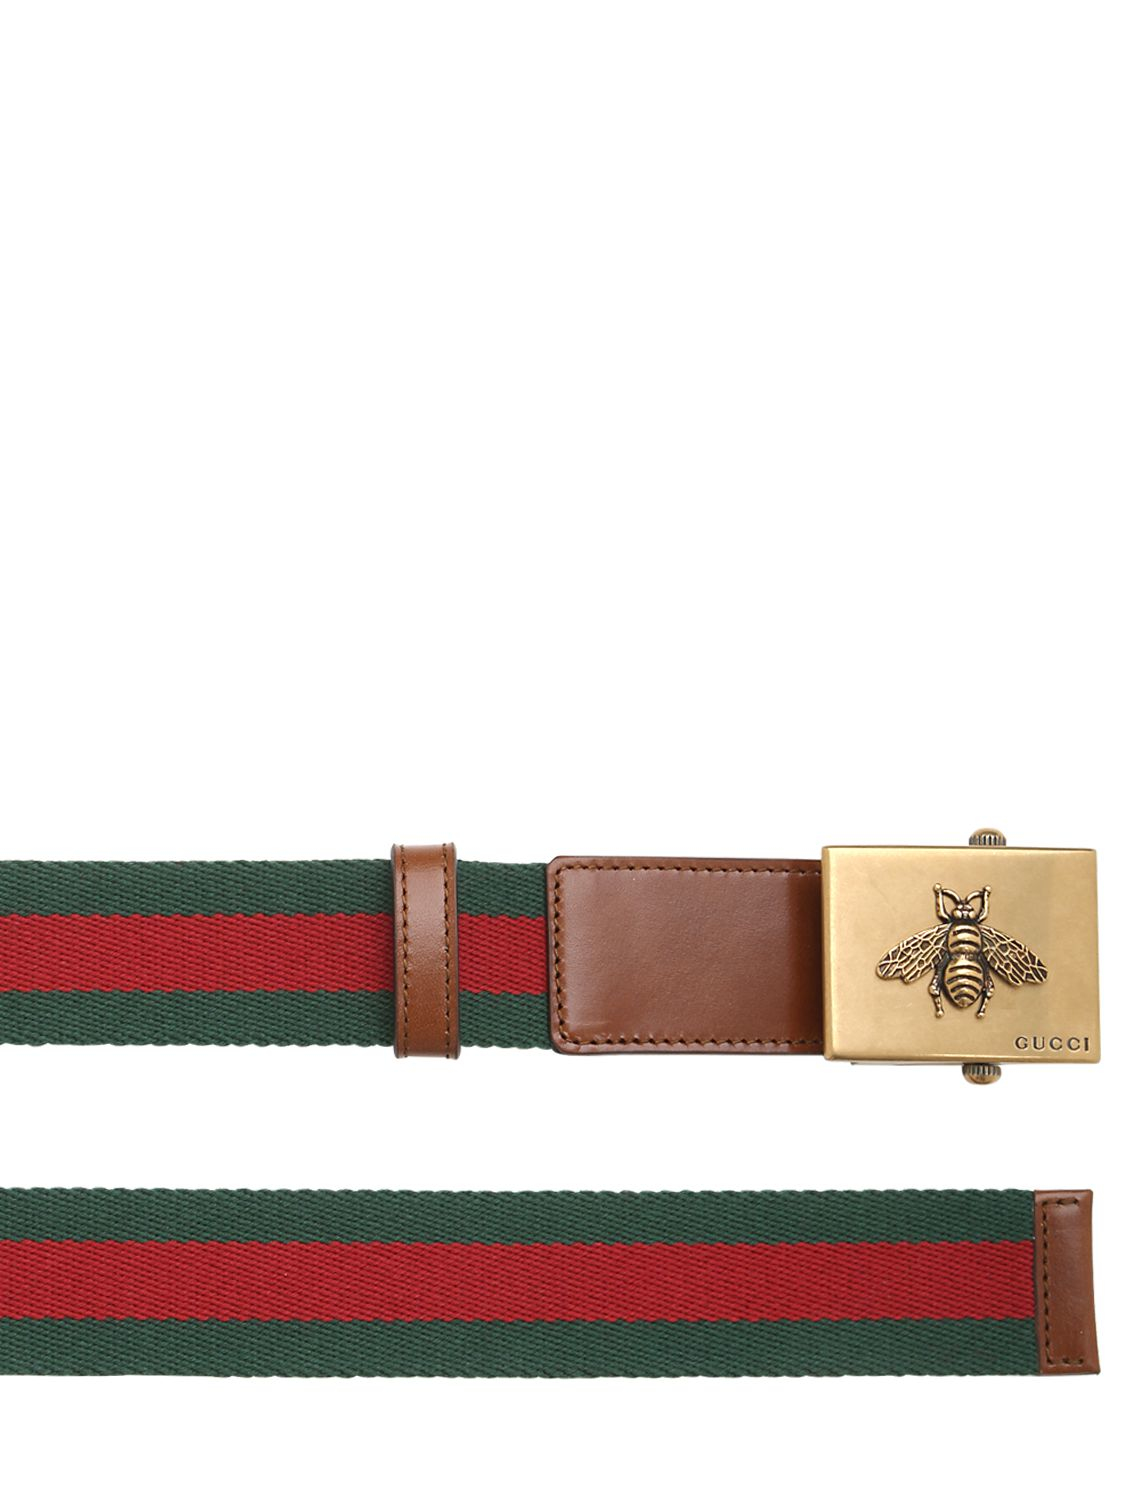 Lyst - Gucci 35mm Bee Buckle Web & Leather Belt in Green